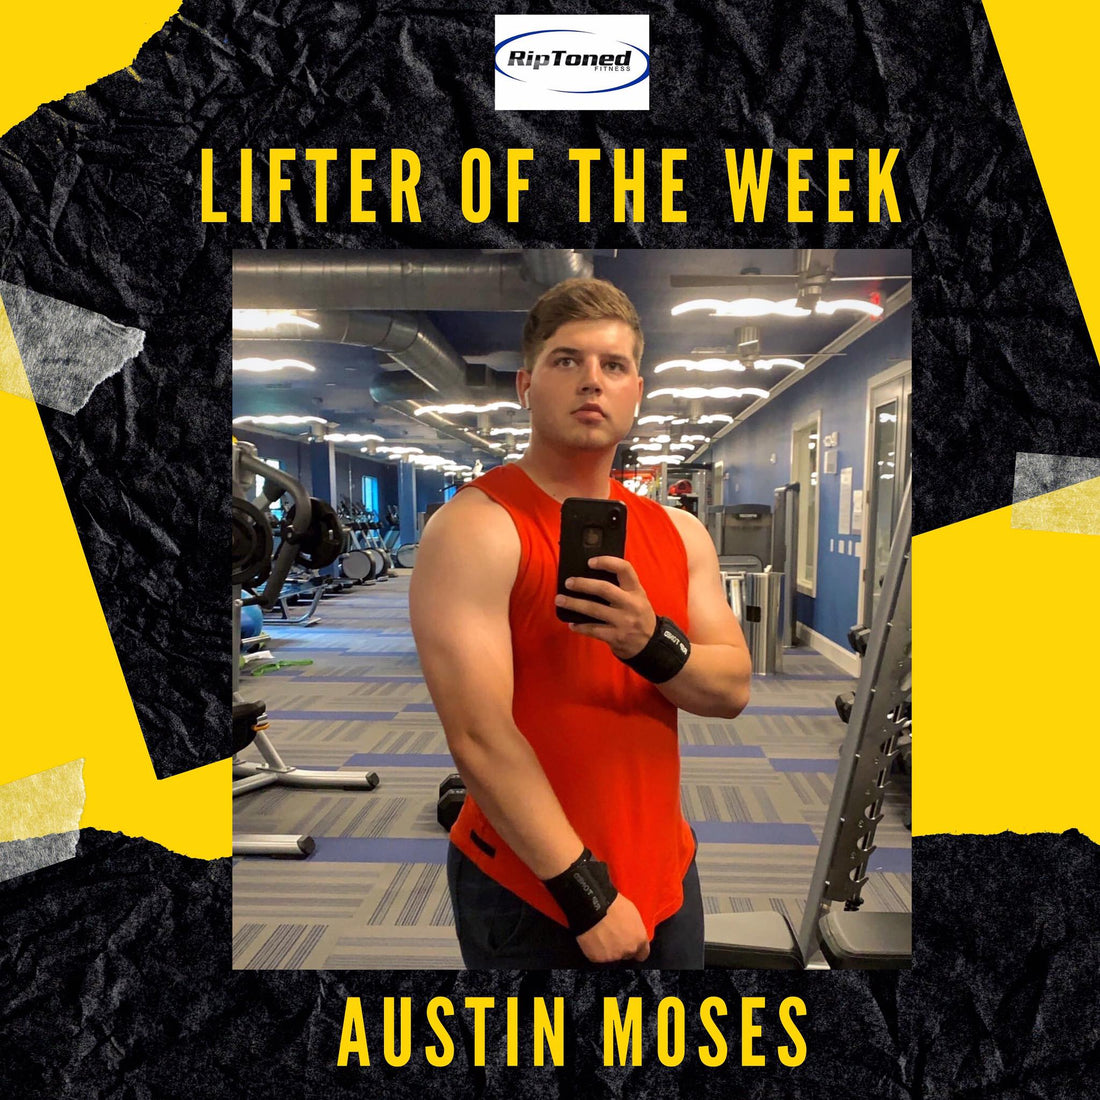 Lifter of the Week -  Austin Moses - Rip Toned